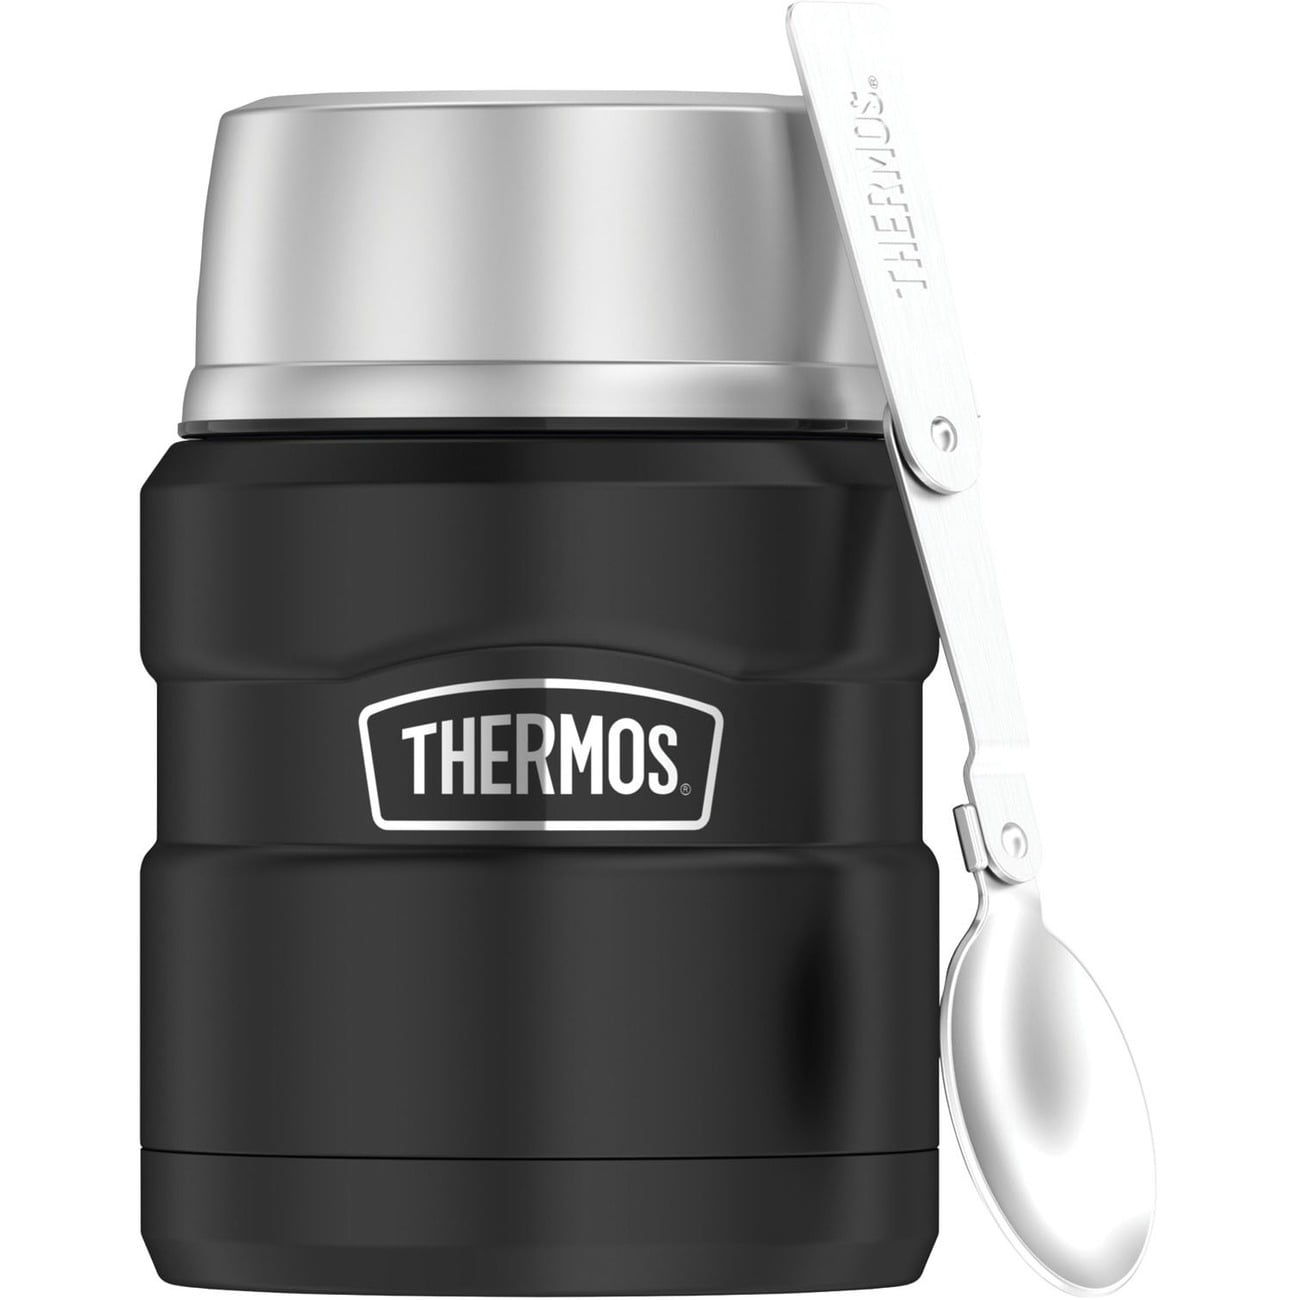 Thermos 16 oz Stainless Steel Food Jar - Whisk